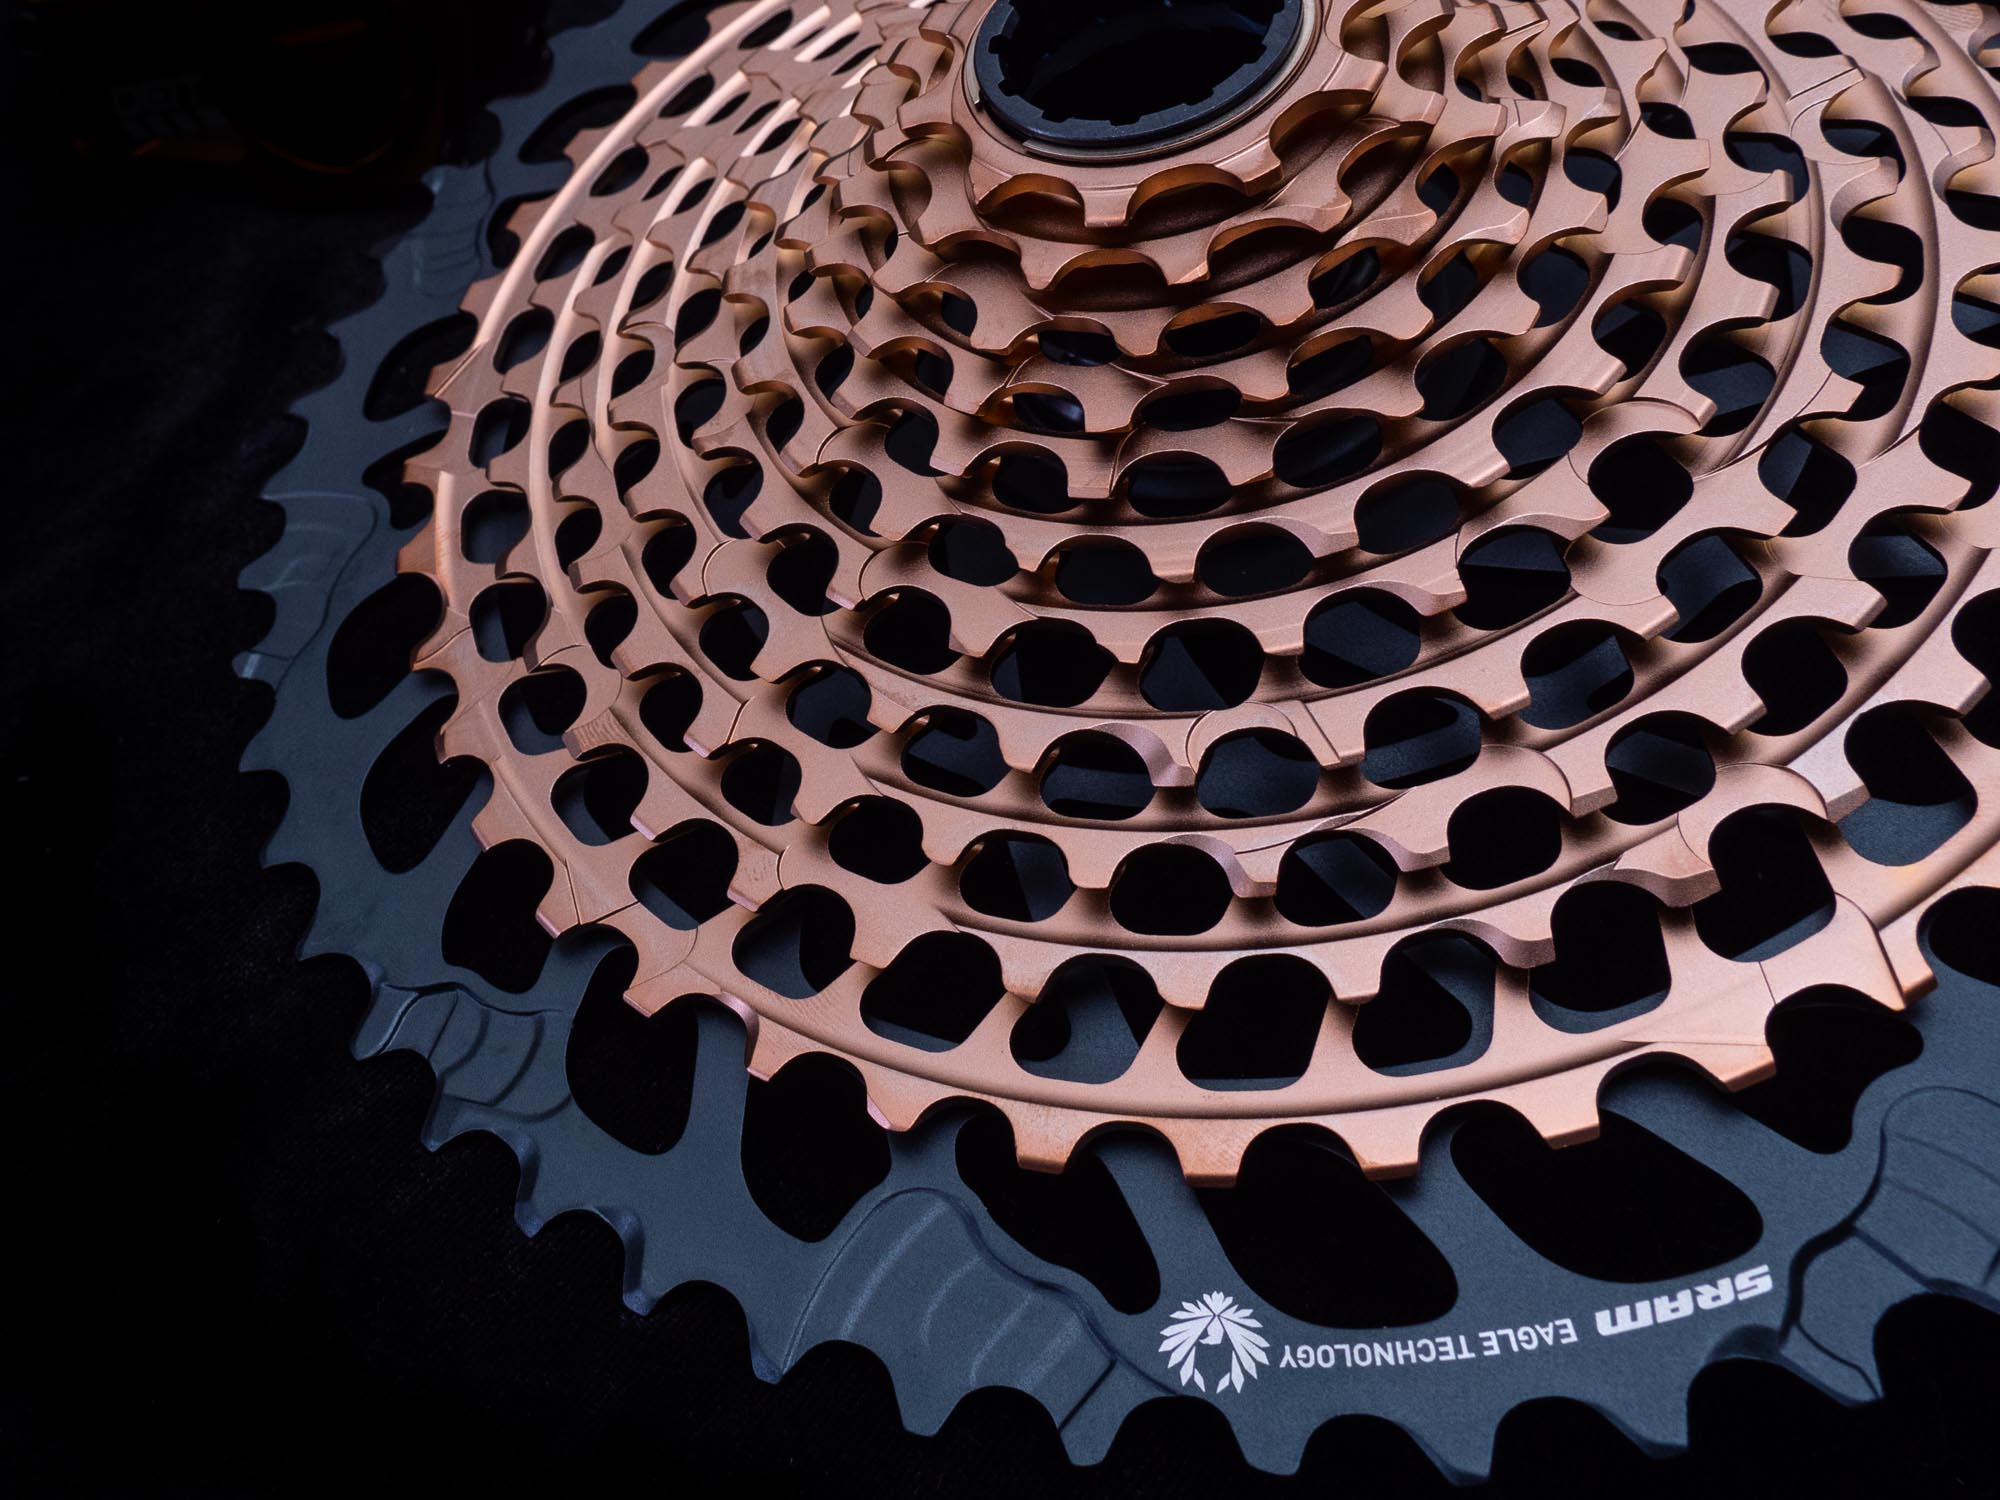 SRAM's gorgeous, lightweight, and highly durable XX1 rear cassette saves more weight over a GX cassette than going from a GX AXS derailleur to an XX1 AXS derailleur does, and for less money.